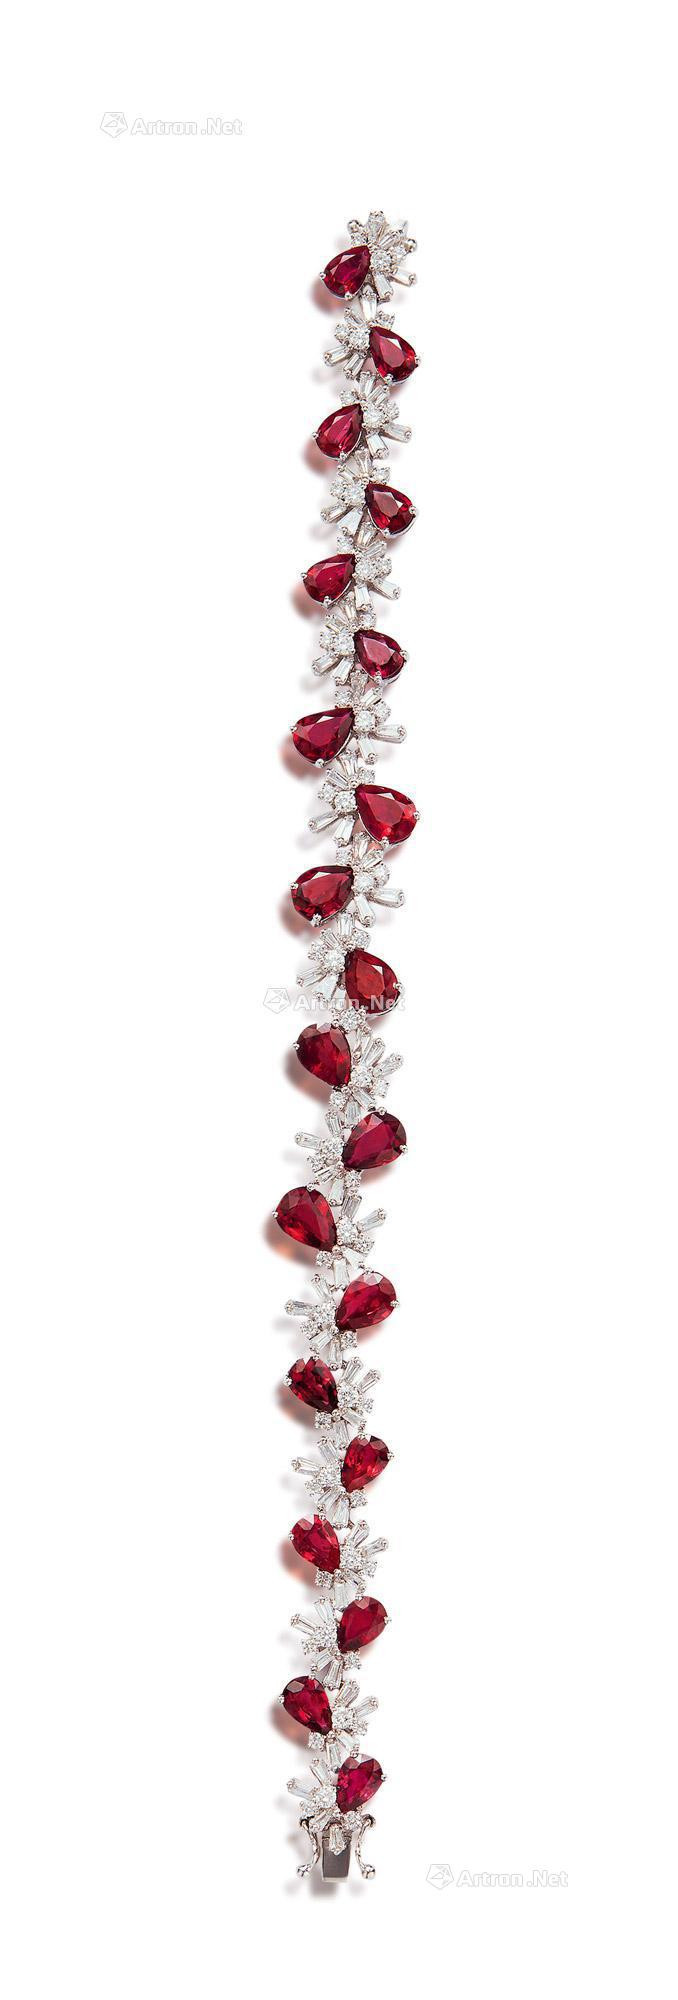 AN ALTOGETHER WEIGHING 11.04 CARATS RUBY AND DIAMOND BRACELET MOUNTED IN 18K WHITE GOLD